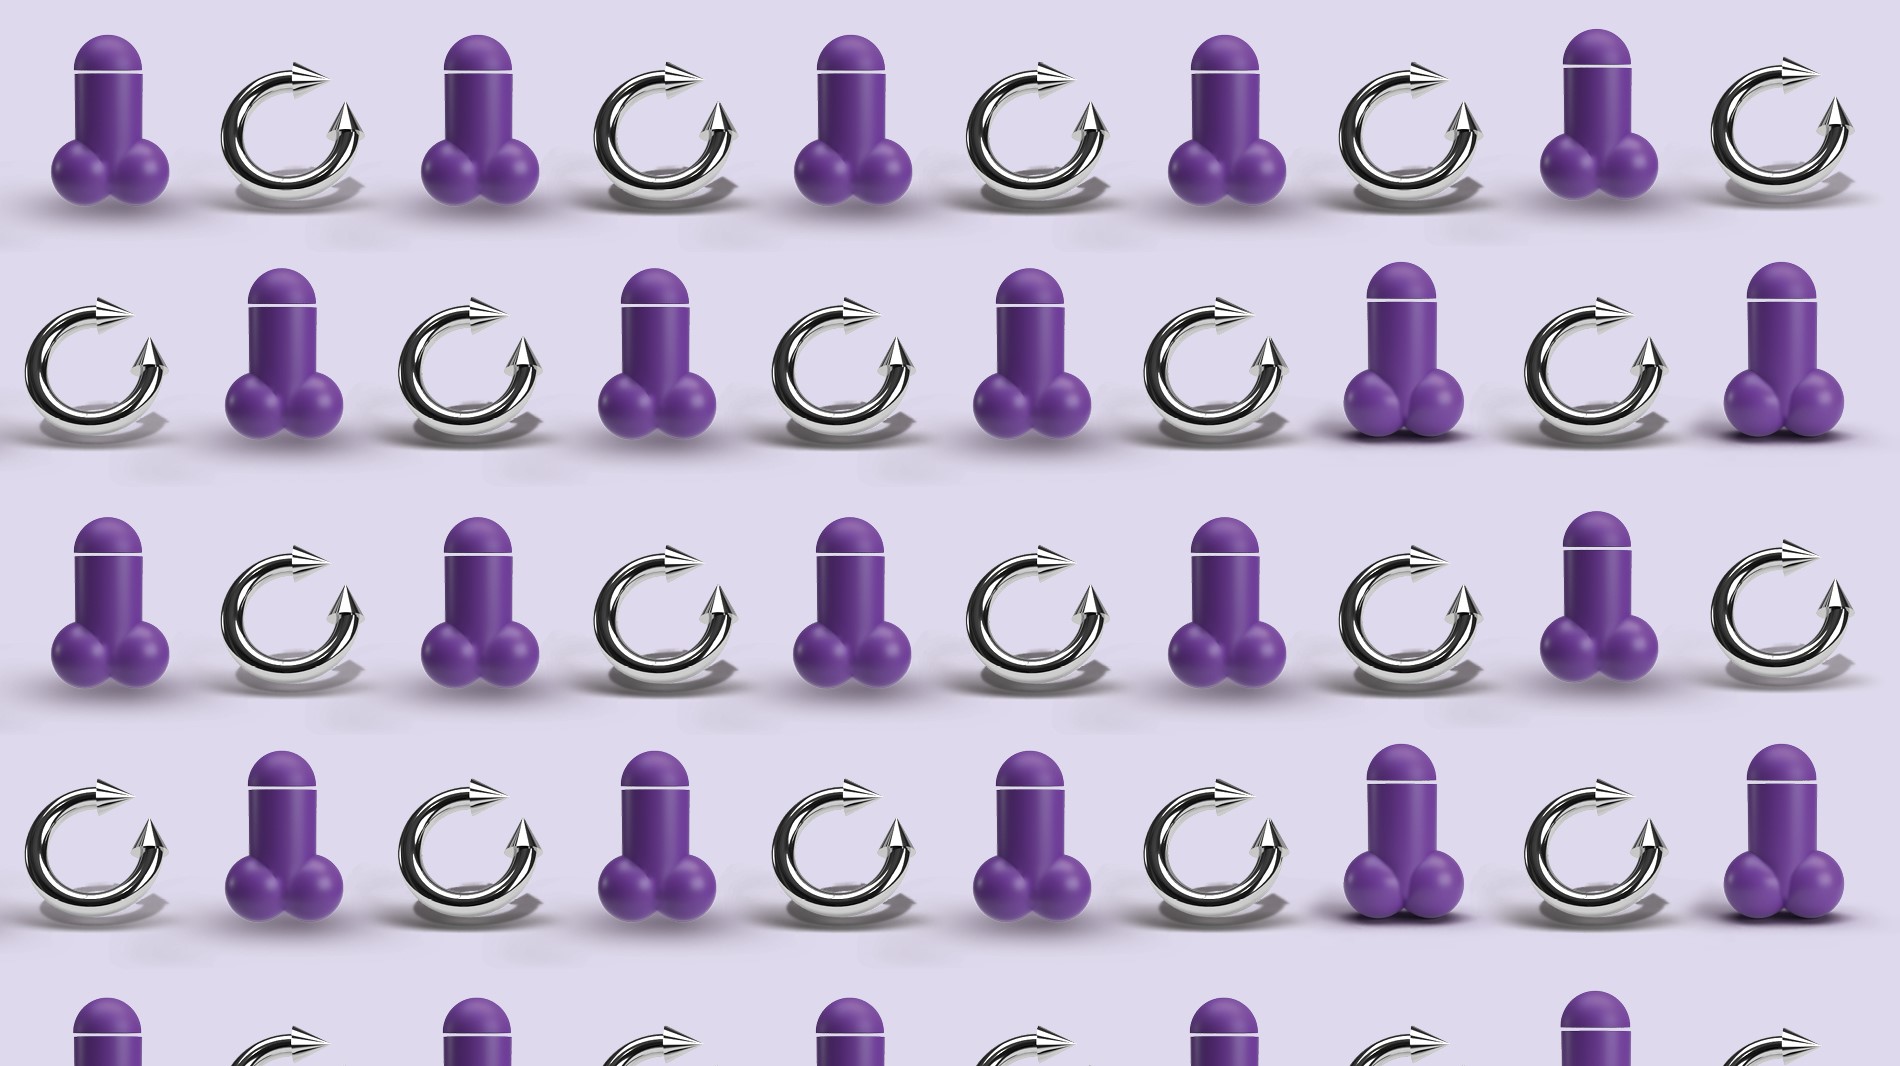 Rows of penis emojis and prince ablerts